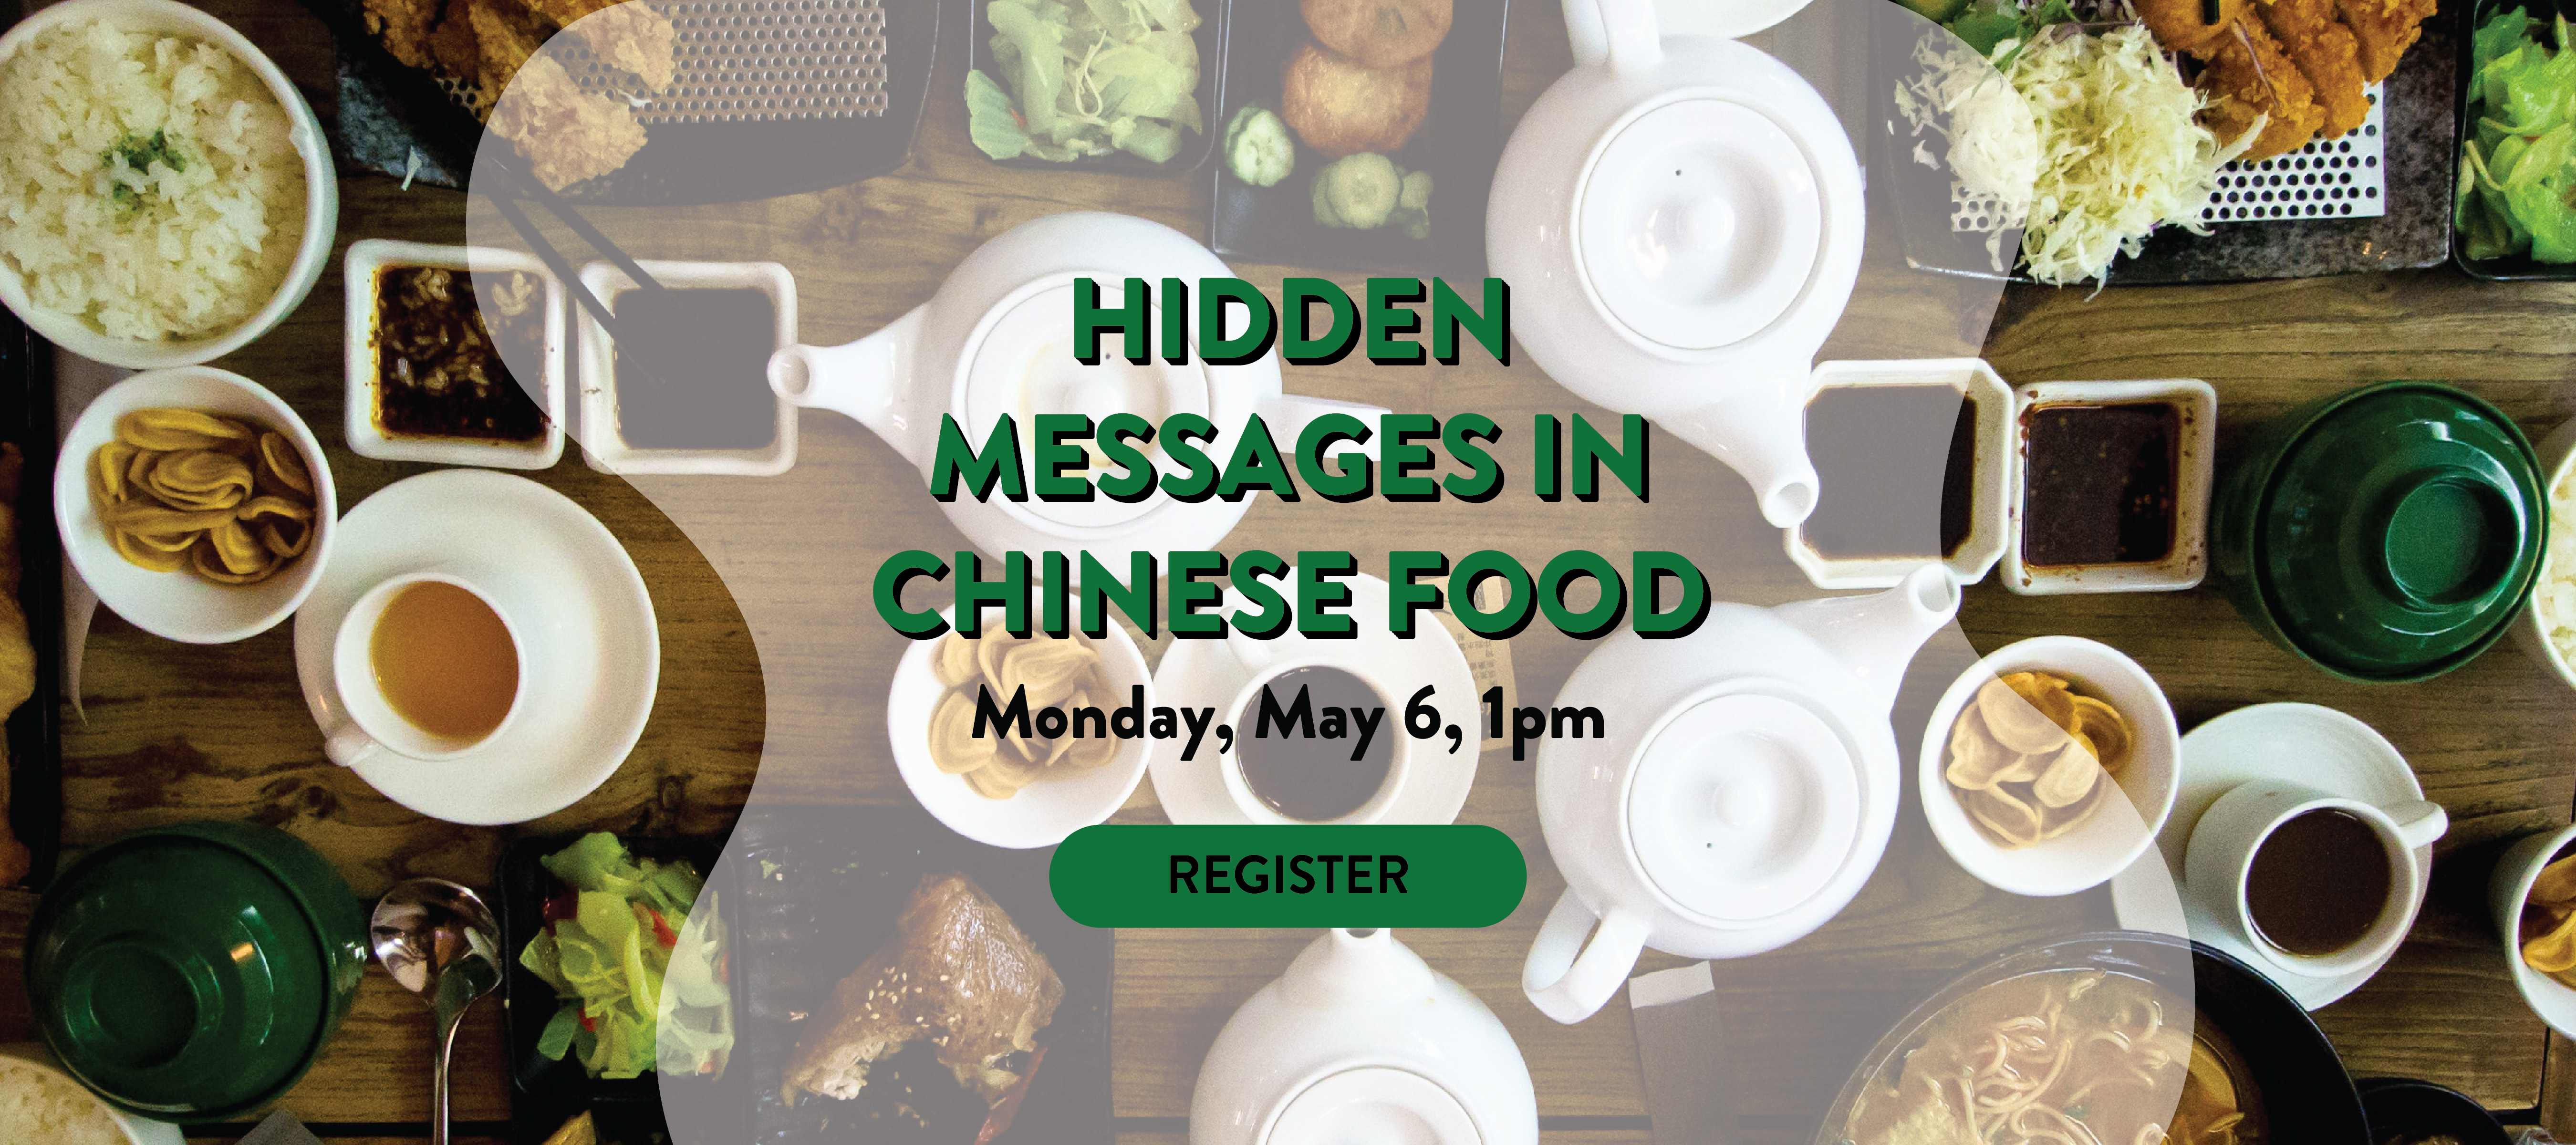 phpl, Prospect Heights Public Library, SOUP, EGGROLL, STIR FRY AND FRIED RICE: HIDDEN MESSAGES IN CHINESE FOOD, history, heritage, dining experience, Adult